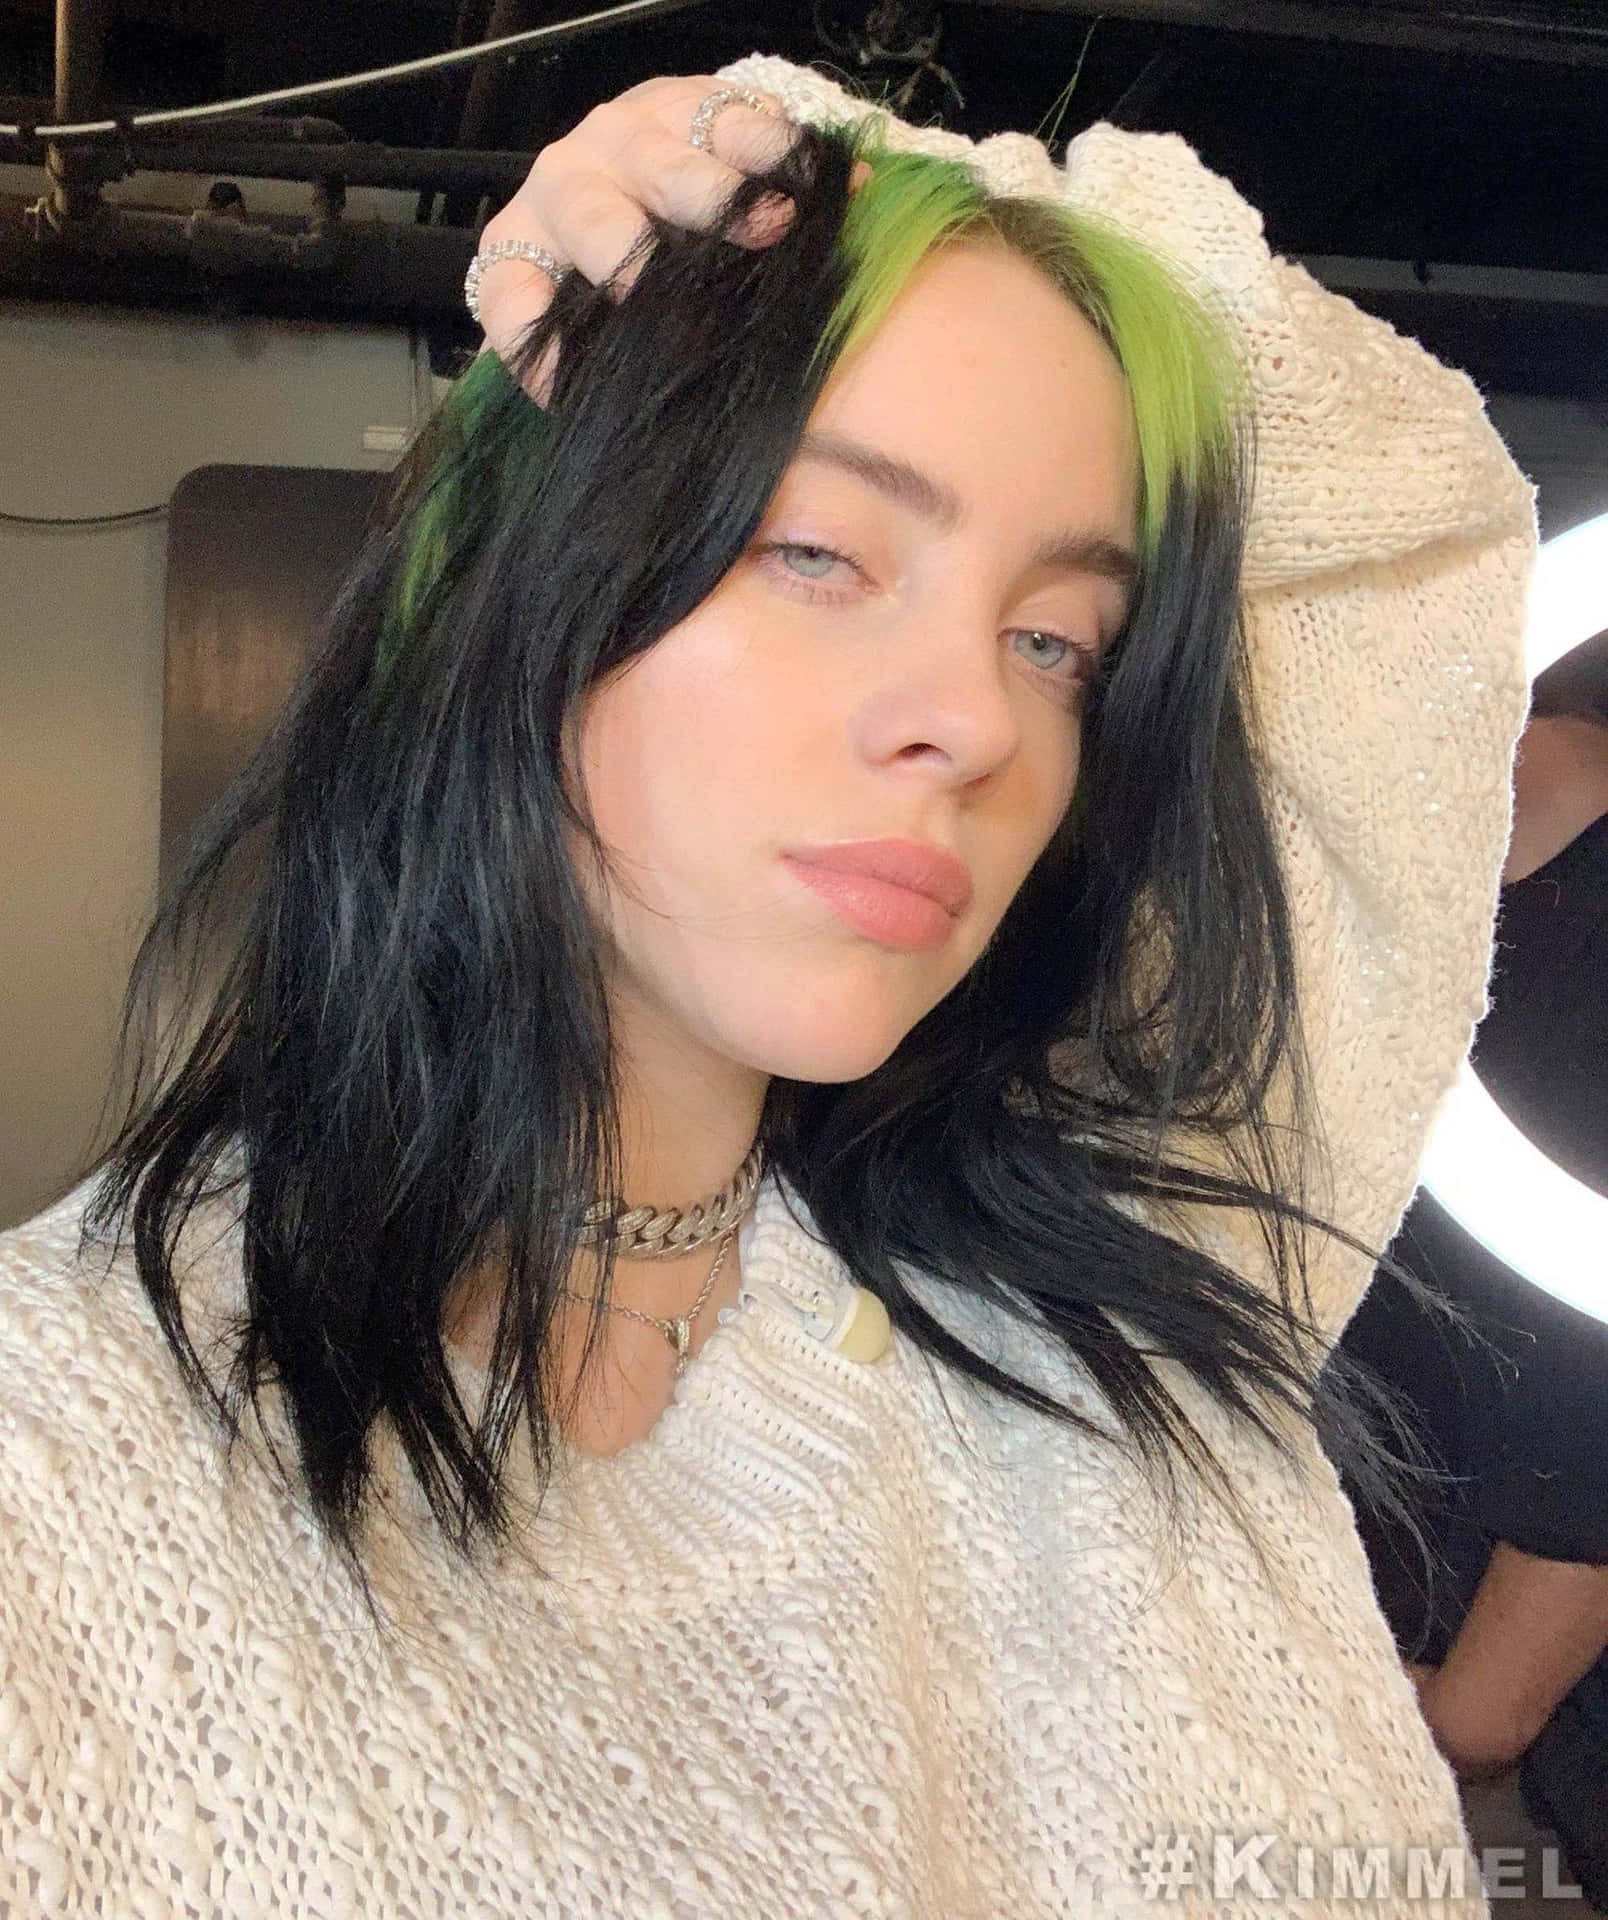 Billie Eilish Takes On 2021 With Confidence Wallpaper